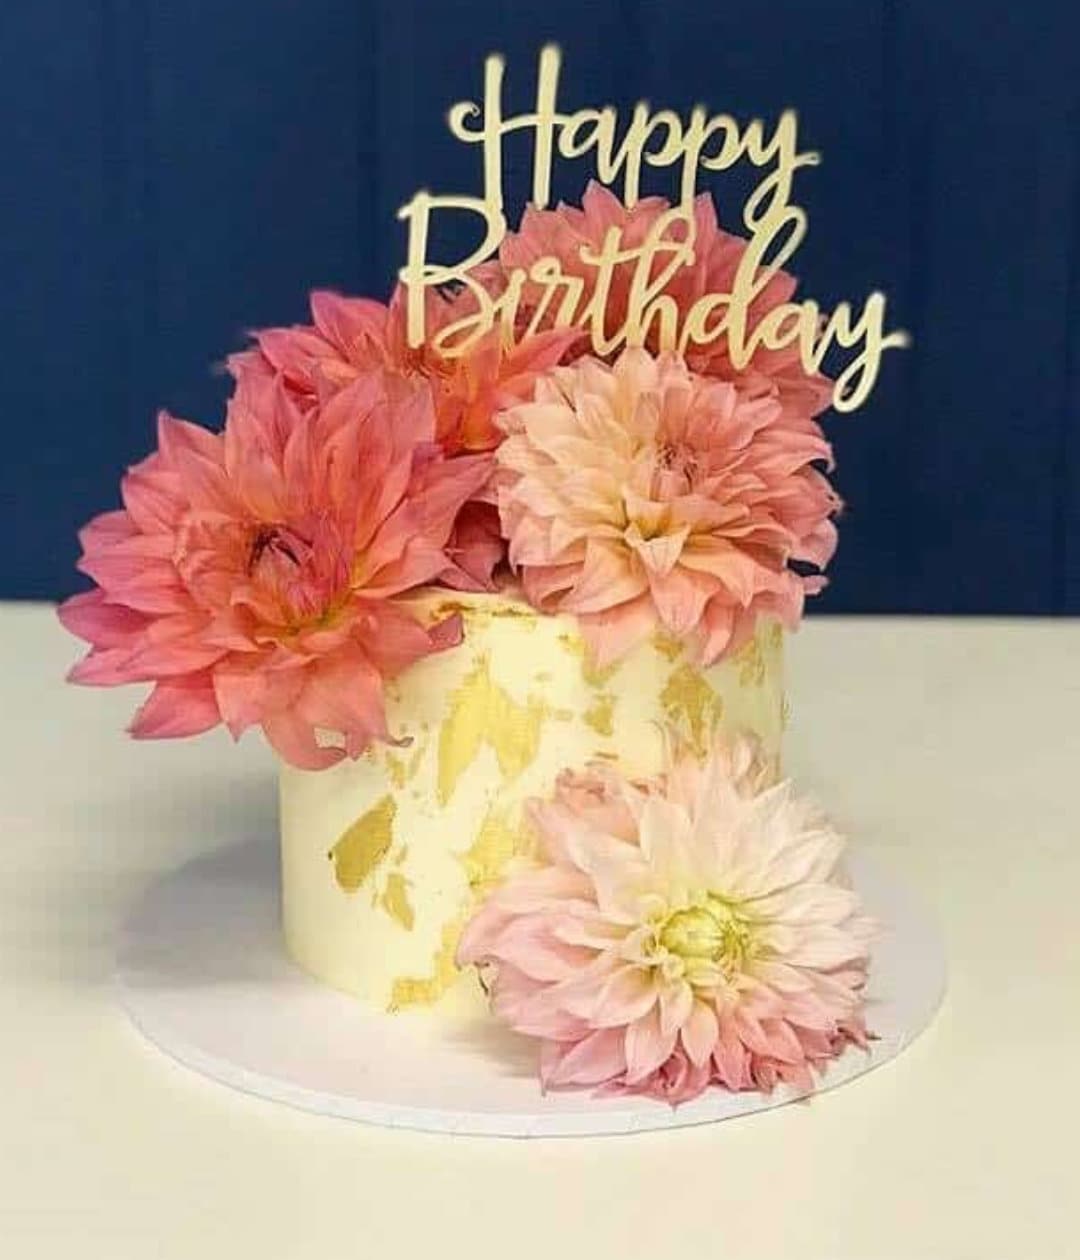 Gold Rose Roses Gold Black Happy Birthday Acrylic Cake Decoration Card Cake  Topper Baking Plugin Birthday Party Decoration G From Hemplove, $24.16